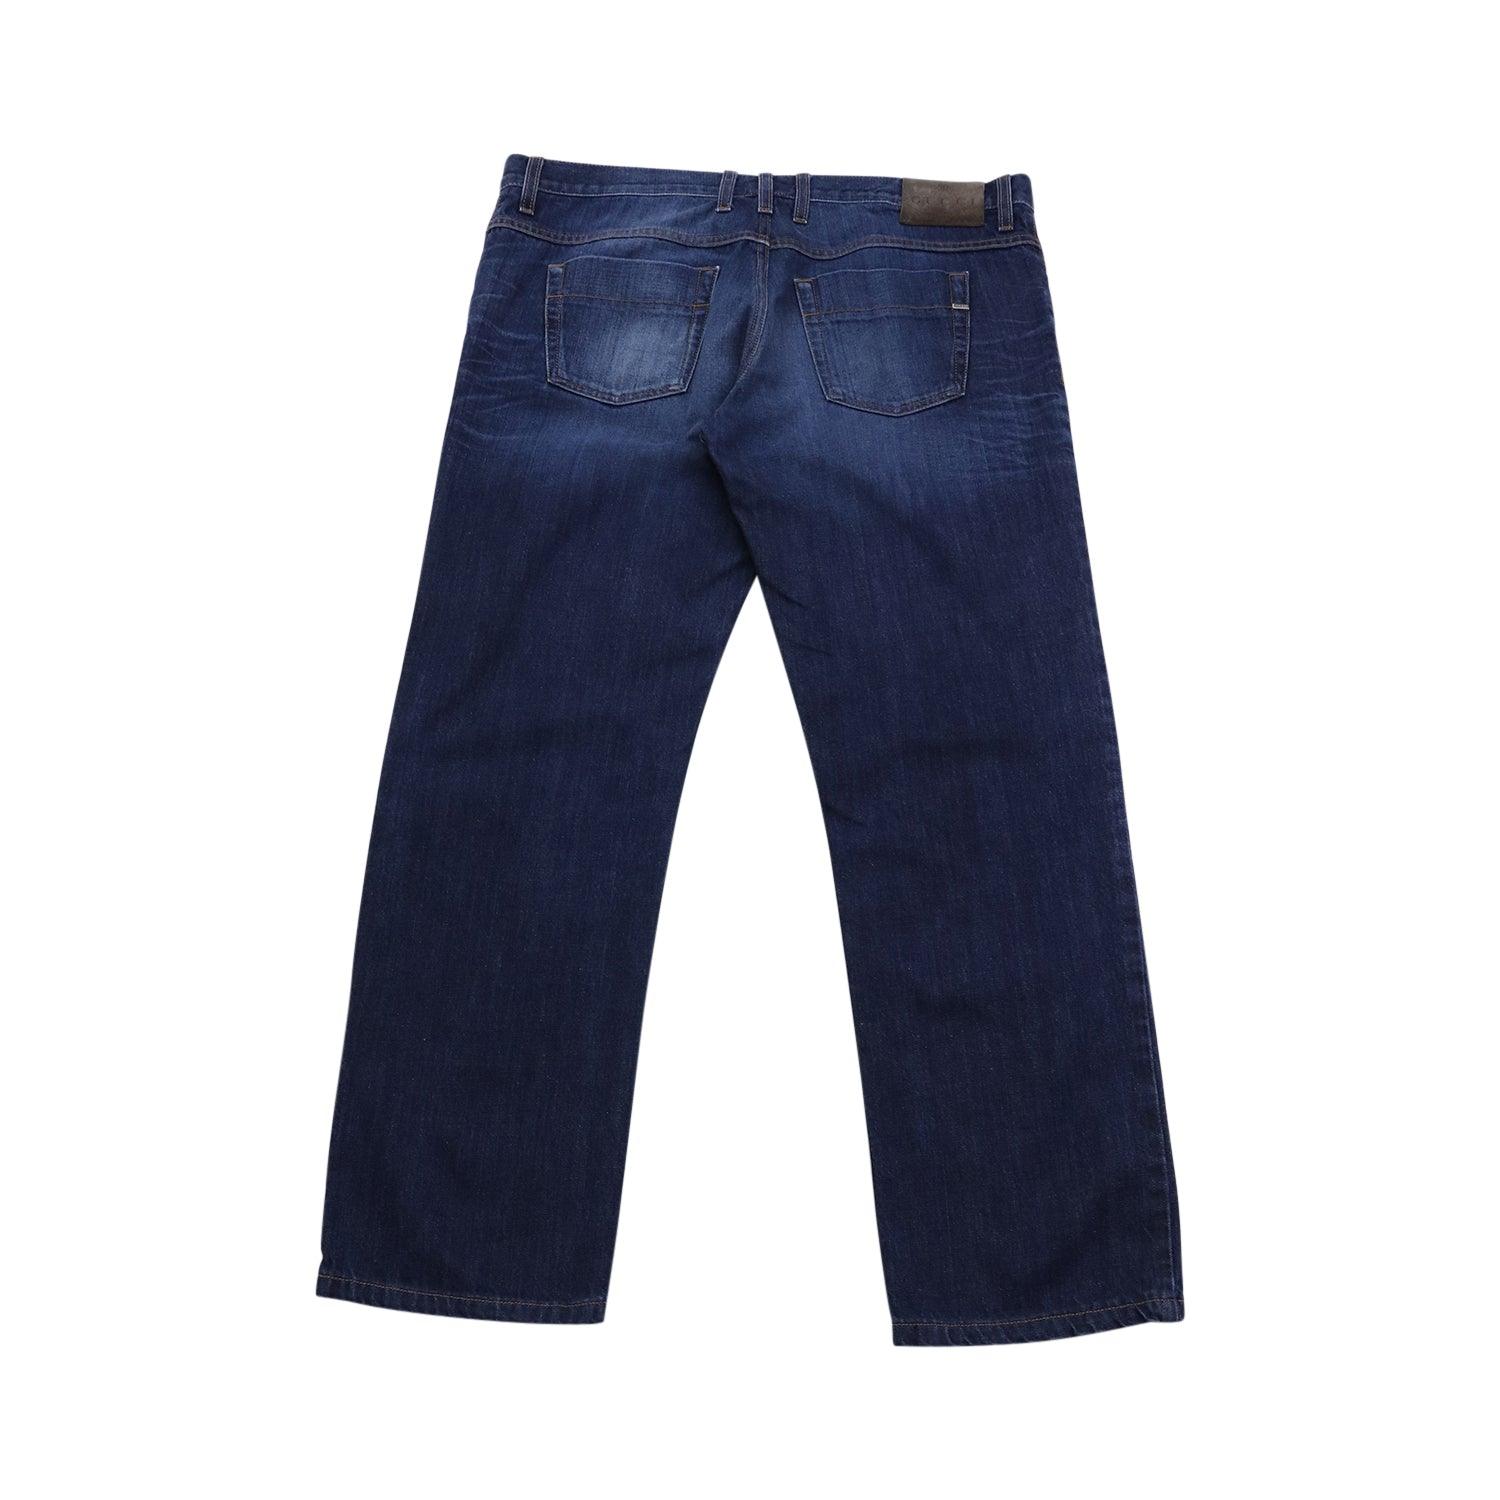 Gucci Jeans - Men's 54 - Fashionably Yours